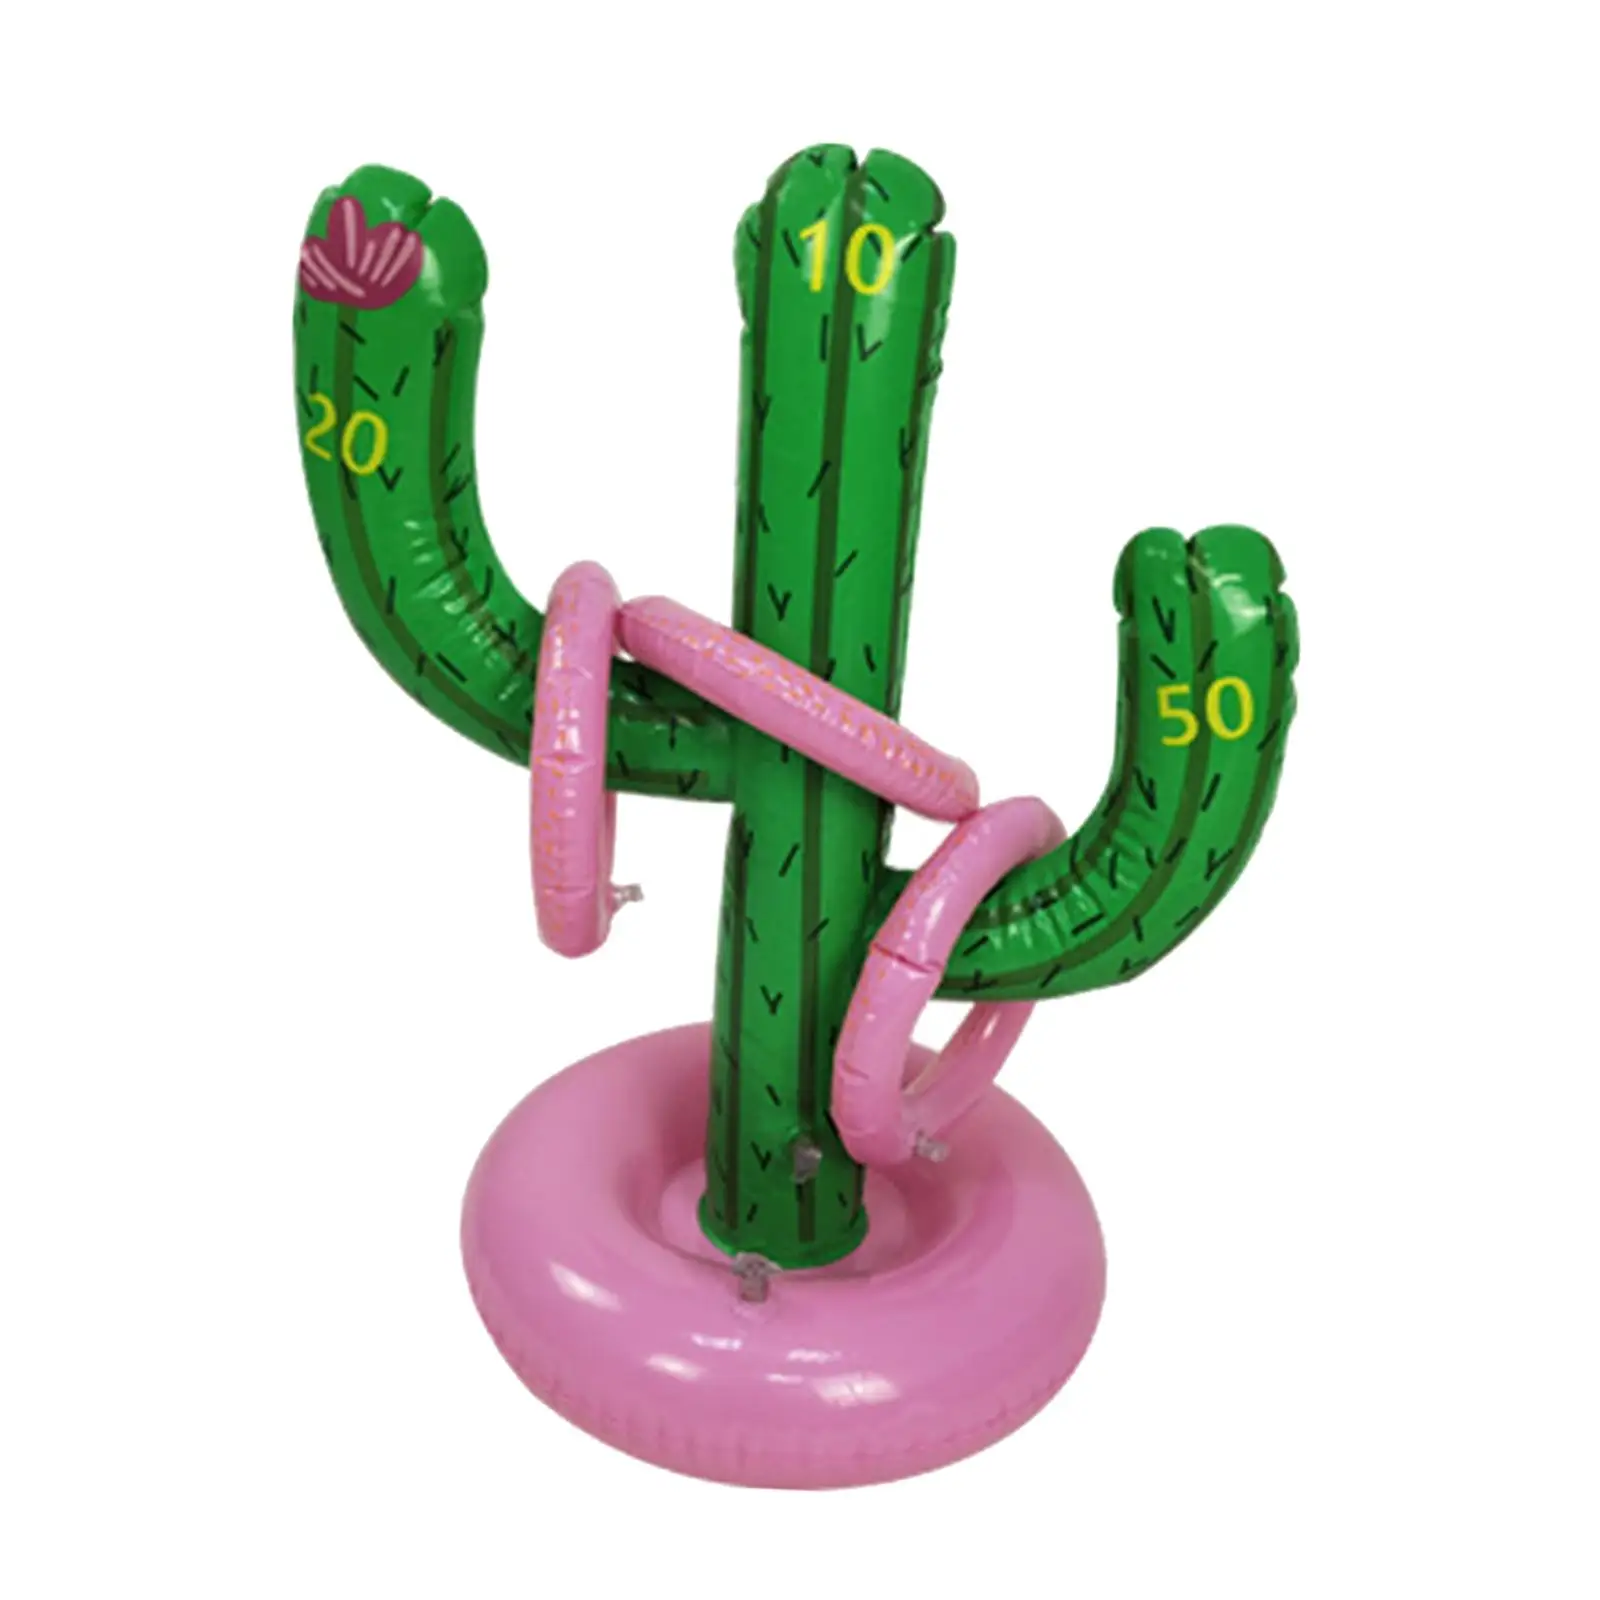 Inflatable Cactus Rings Toss Interactive Pool Toys for Leisure Teamwork